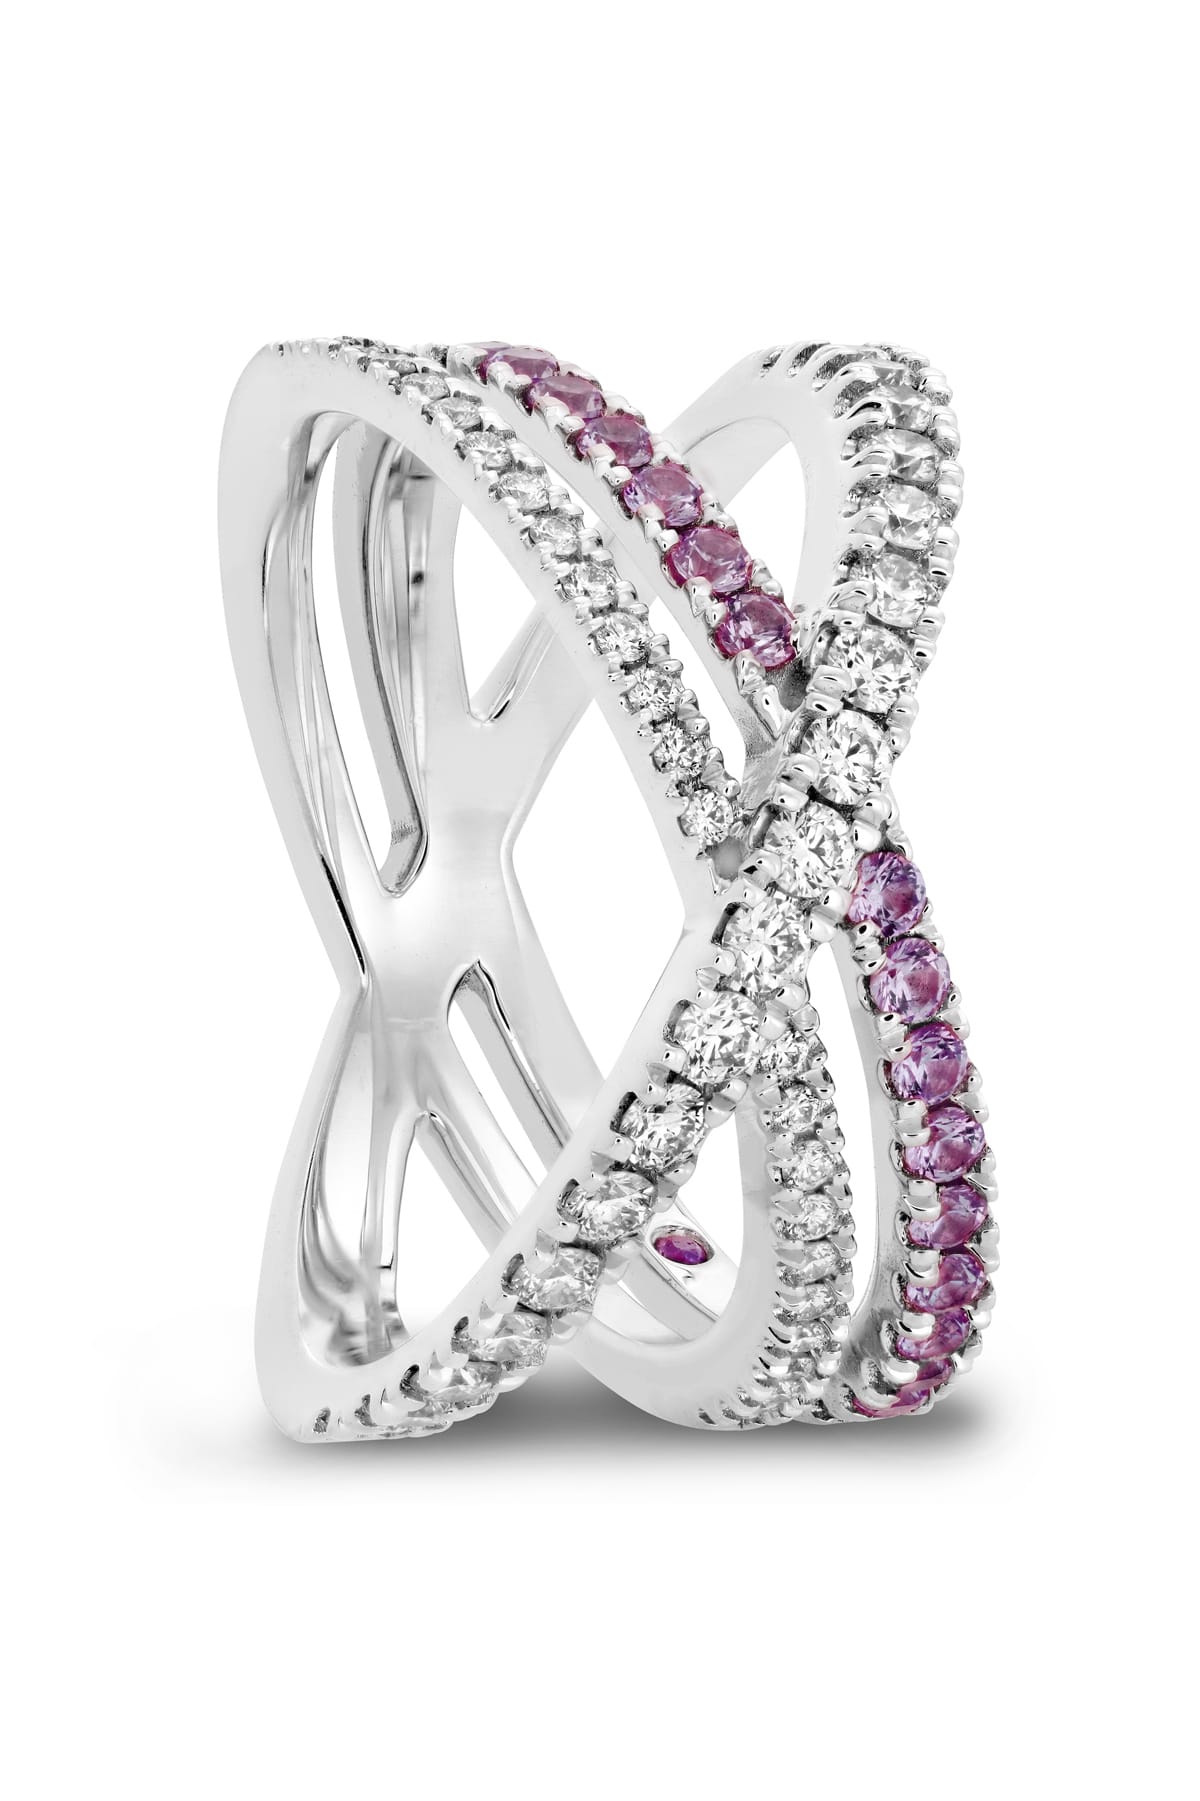 Harley Wrap Power Band With Sapphires From Hearts On Fire available at LeGassick Diamonds and Jewellery Gold Coast, Australia.